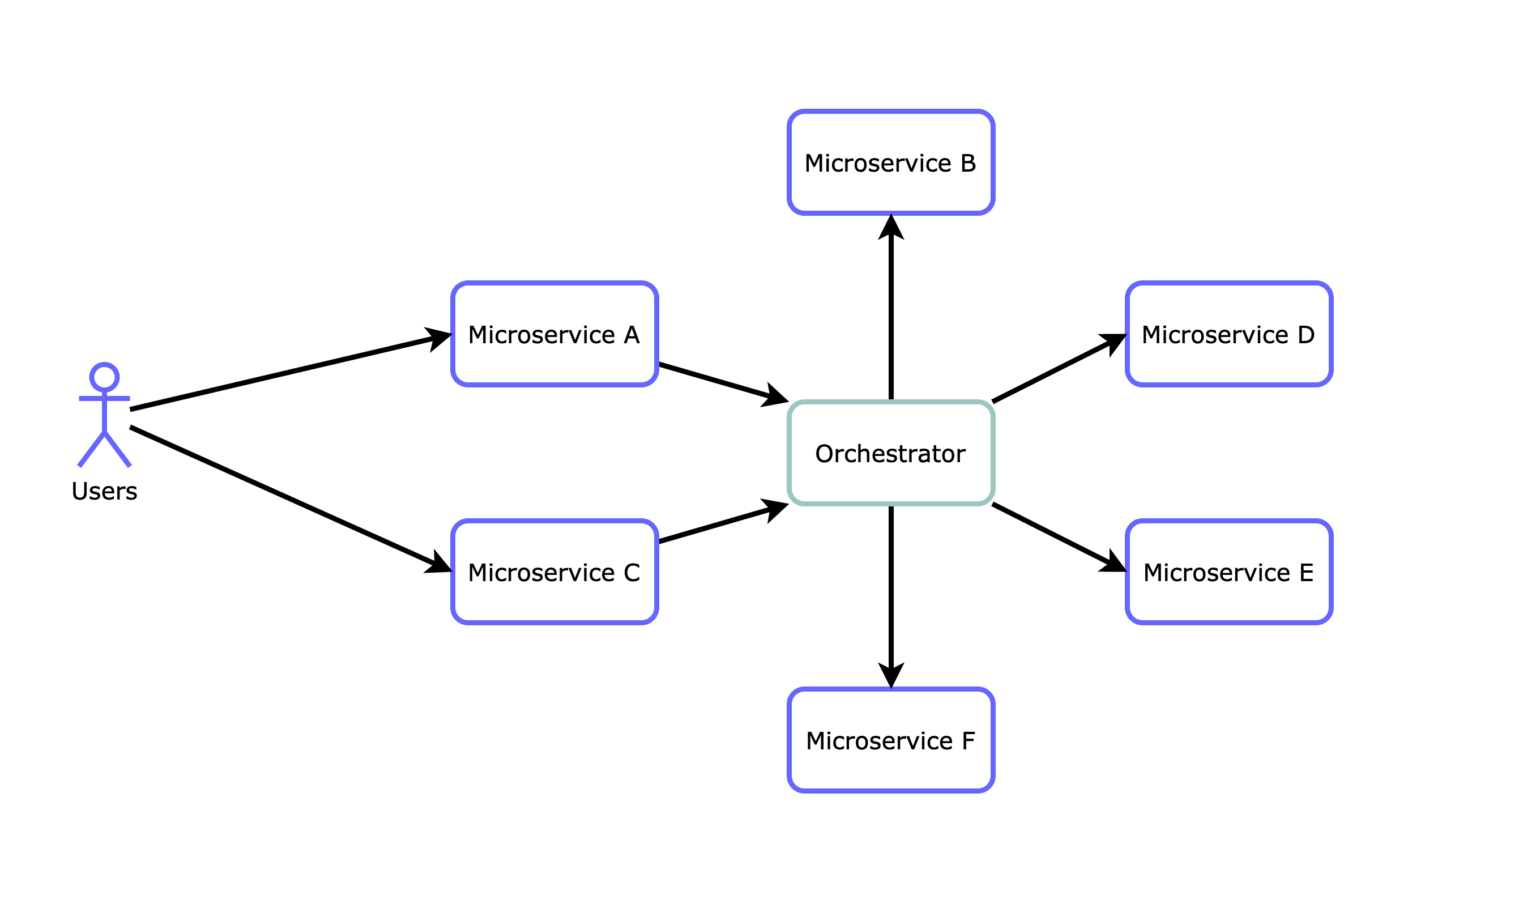 Microservices architecture - orchestrator, choreography, hybrid